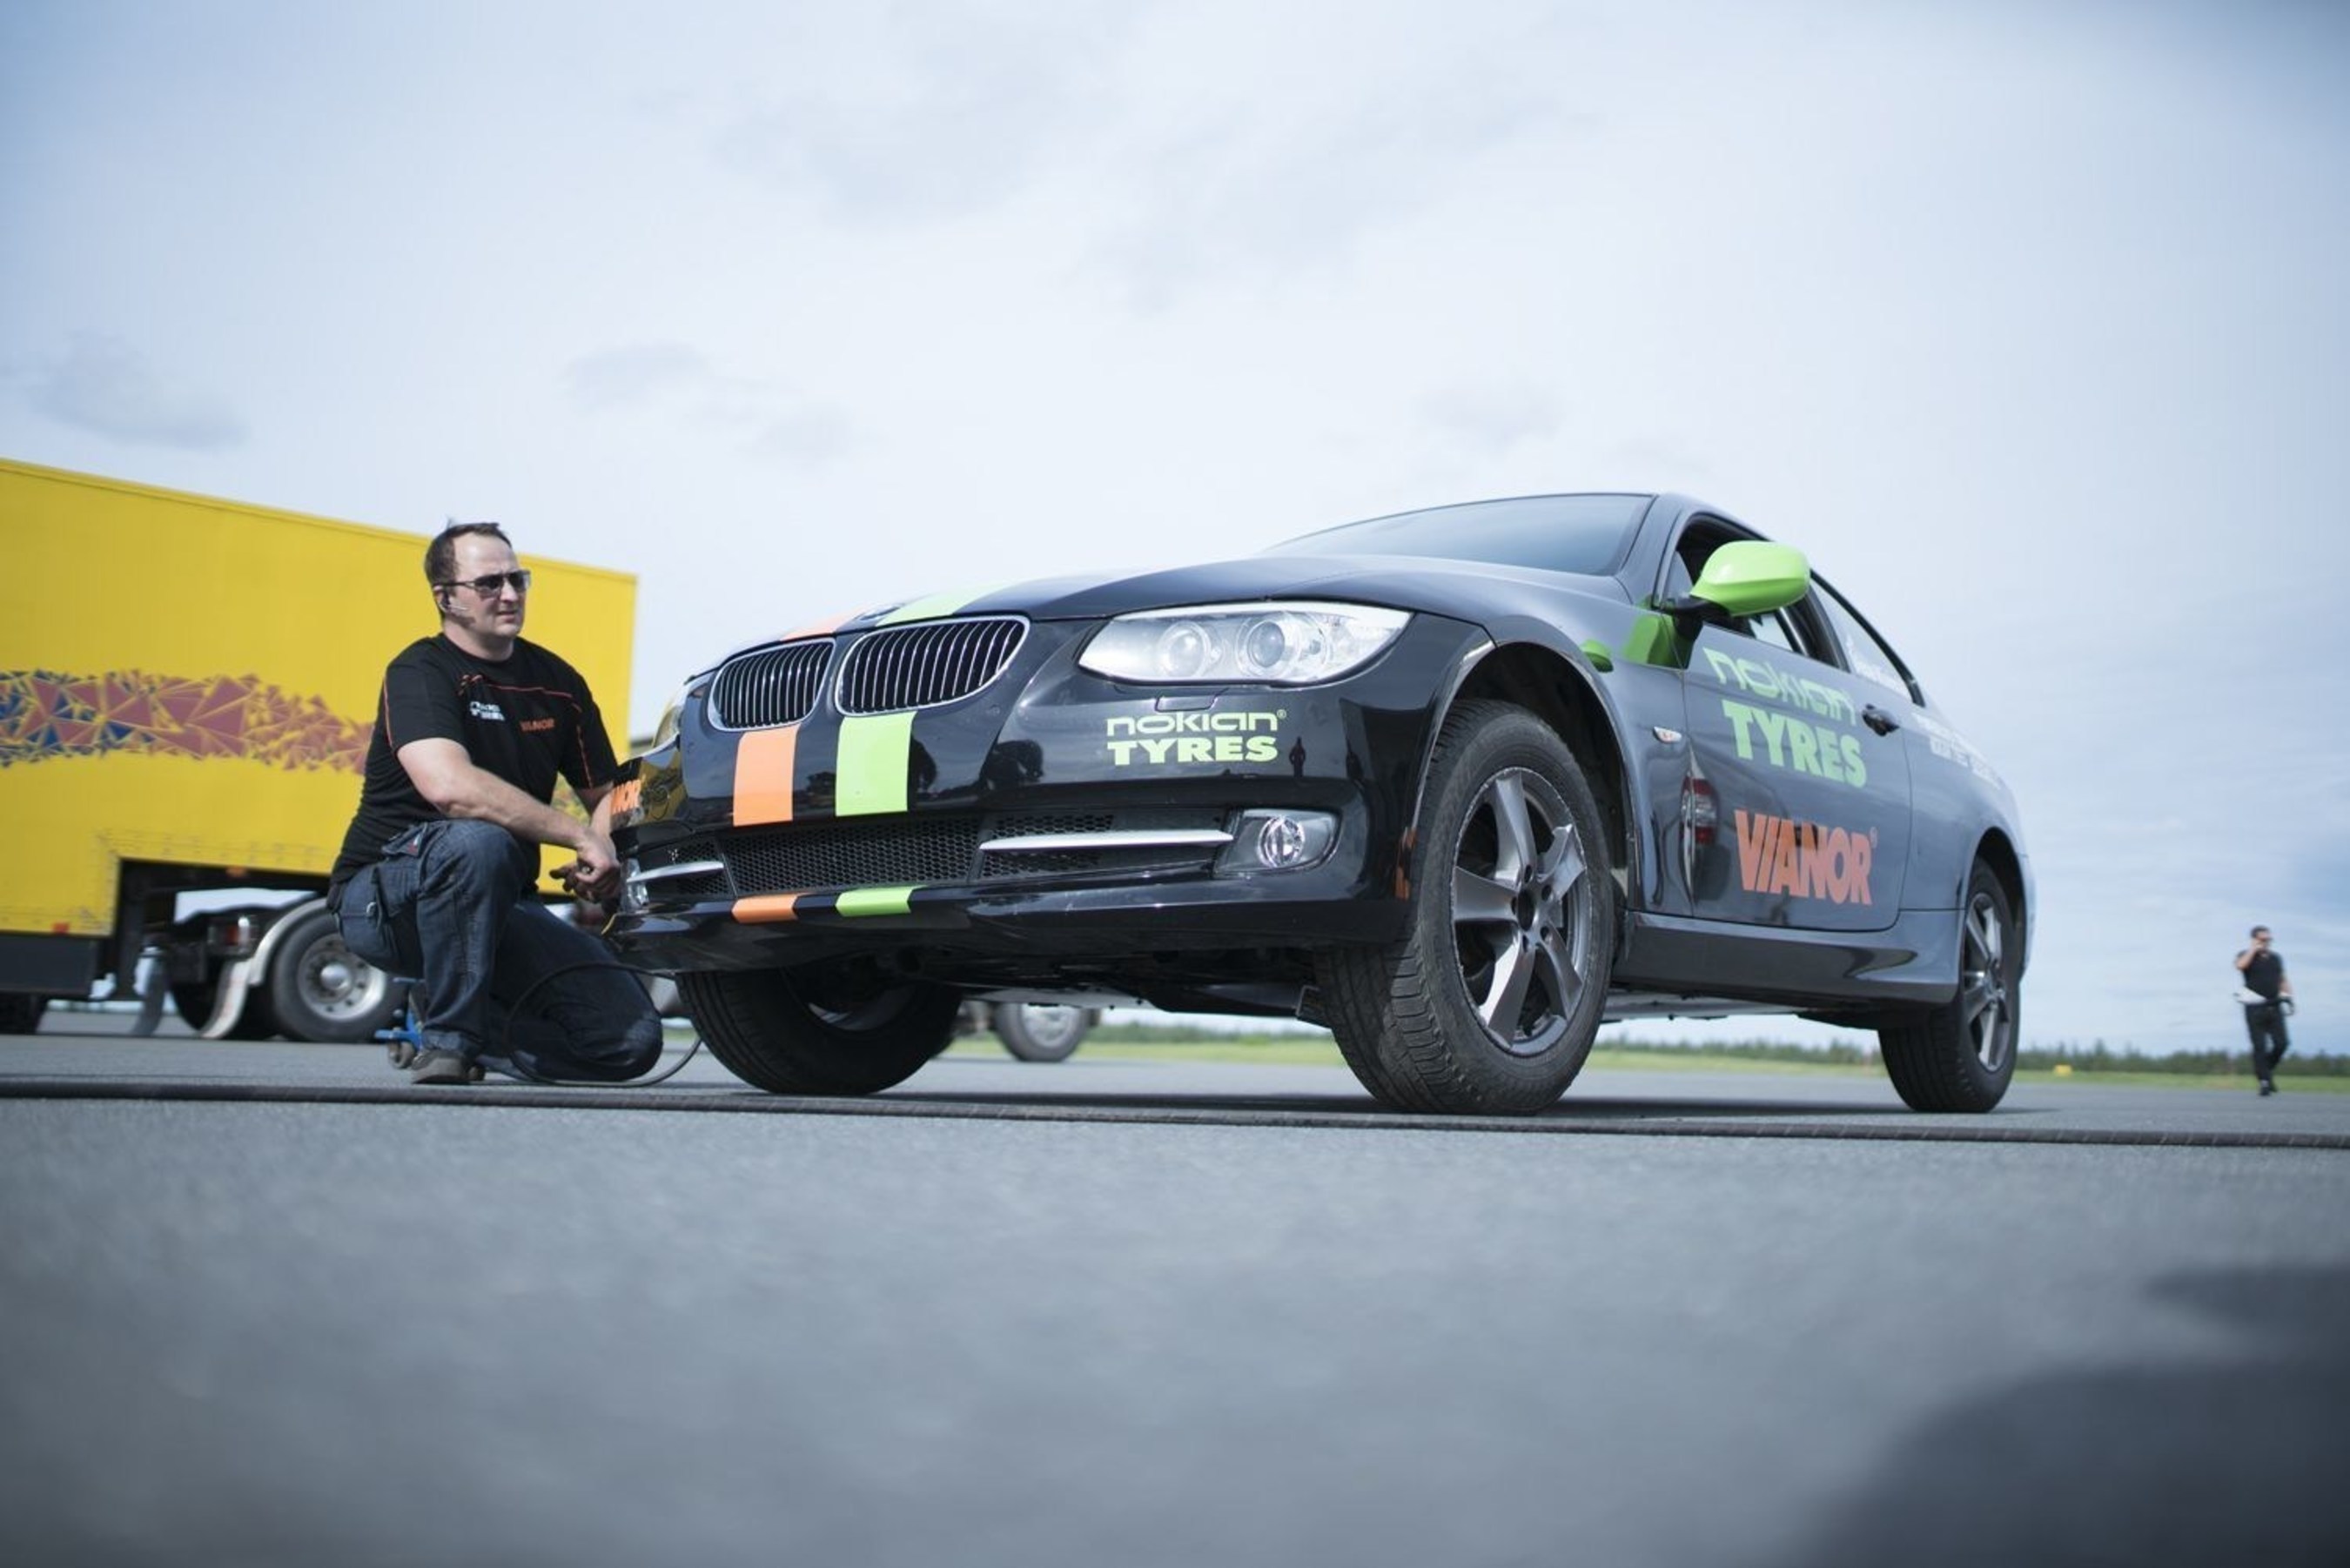 Nokian Tyres - Fastest side wheelie in a car. The new world record was set when Nokian Tyres, Vianor and stunt driver Vesa Kivimäki combined their strengths. Vianor's expert pit crew participated in the world record by taking care of the record-breaking car and its tyres. The team could change tyres rapidly and report the condition of the car and tyres in real time to the driver. More: www.nokiantyres.com/fastestwheelie (PRNewsFoto/Nokian Tyres)